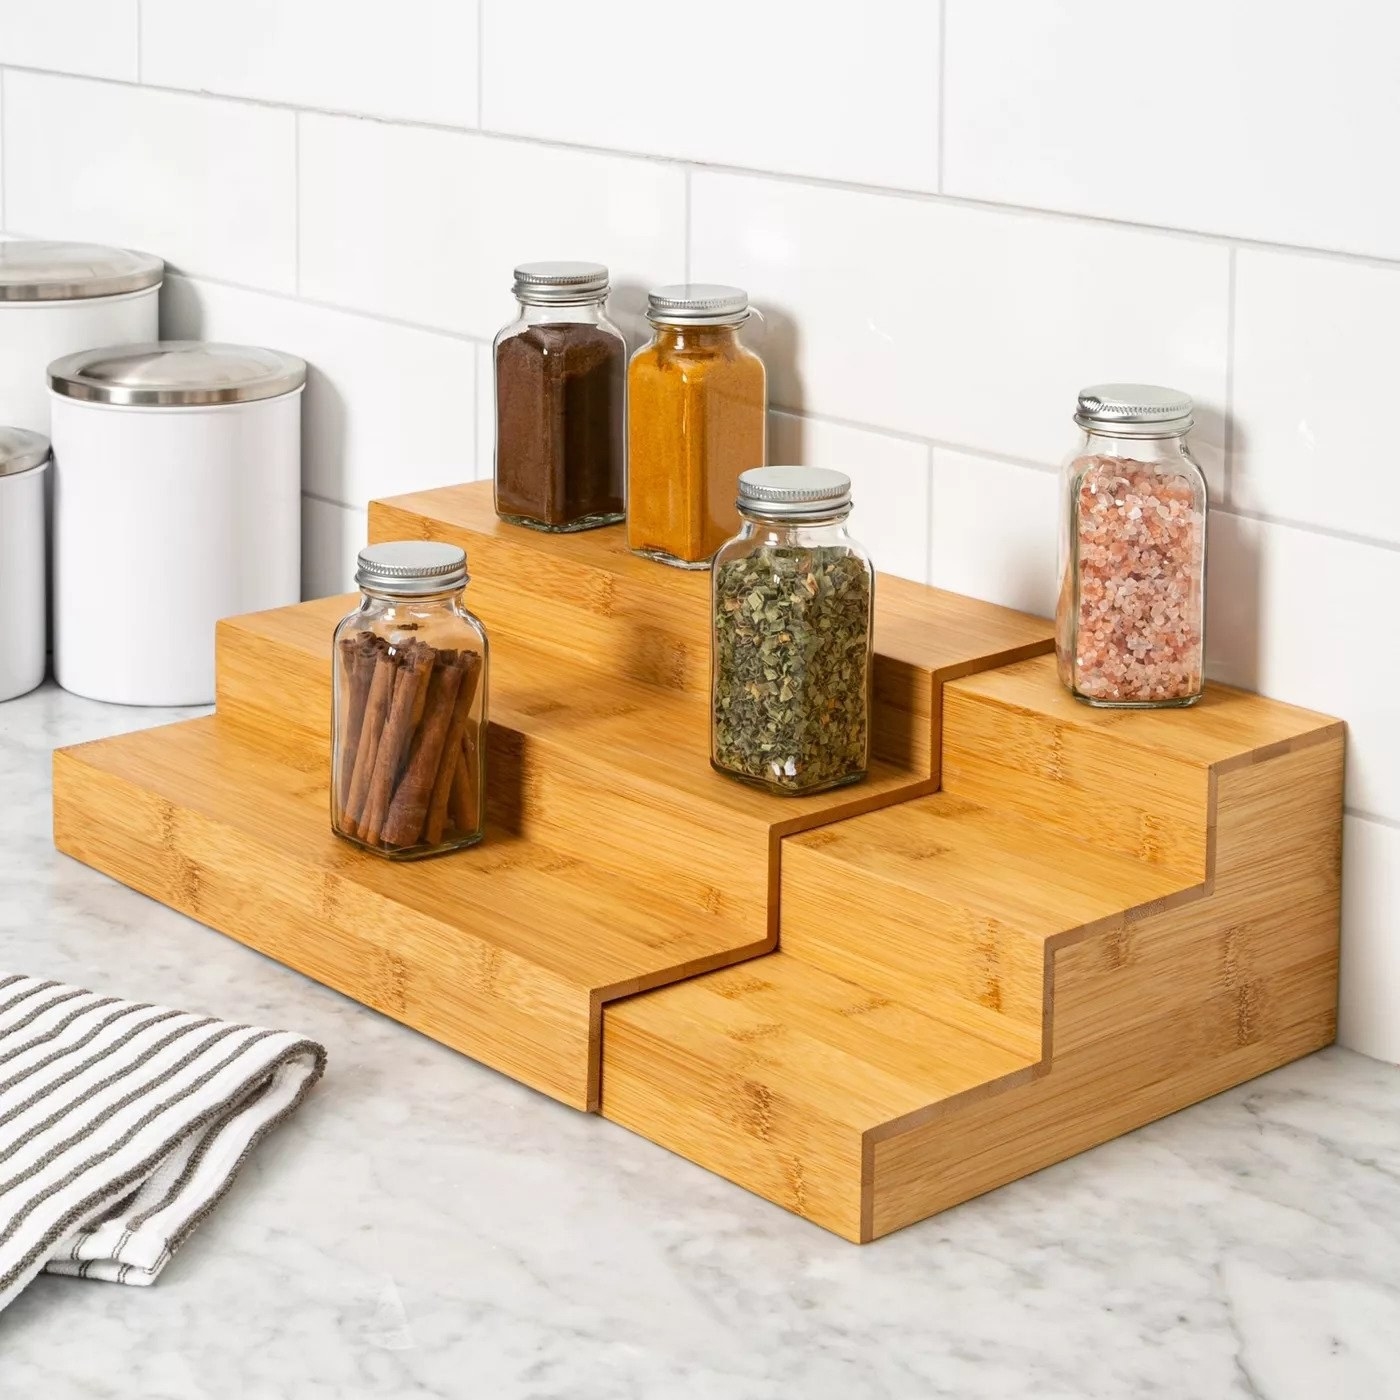 The bamboo expanding spice rack